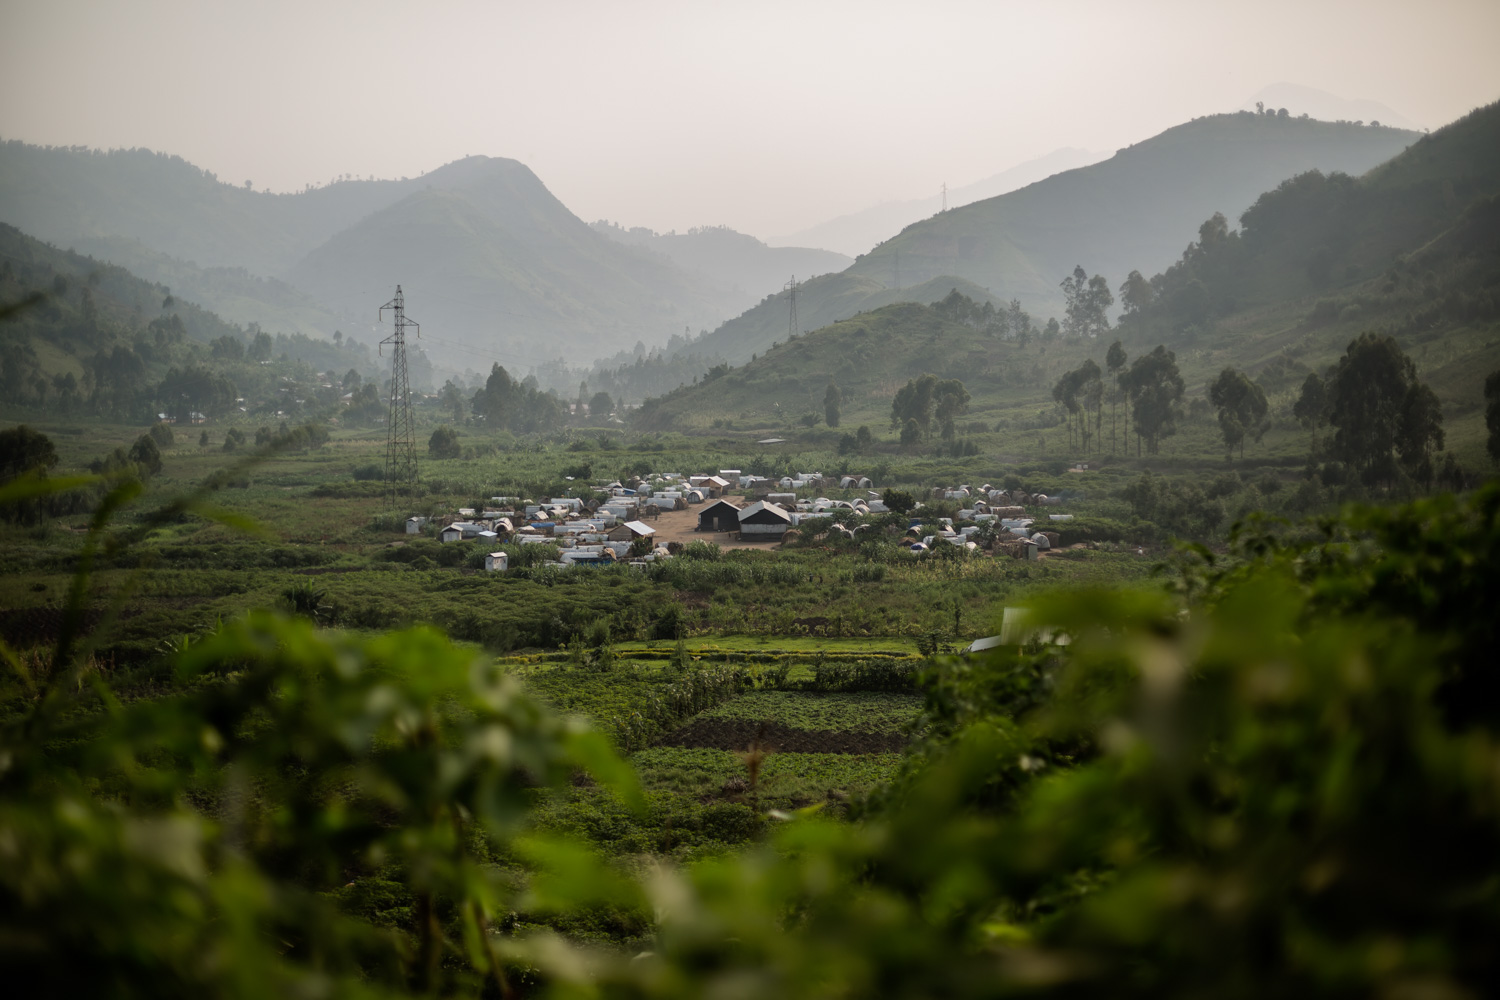  One mile south of Minova is Mubimbi, a small camp for those displaced by the conflict that has plagued Congo for nearly two decades. Eleven of the rape survivors who testified at the rape trial in Minova were living in this camp in November 2012 whe